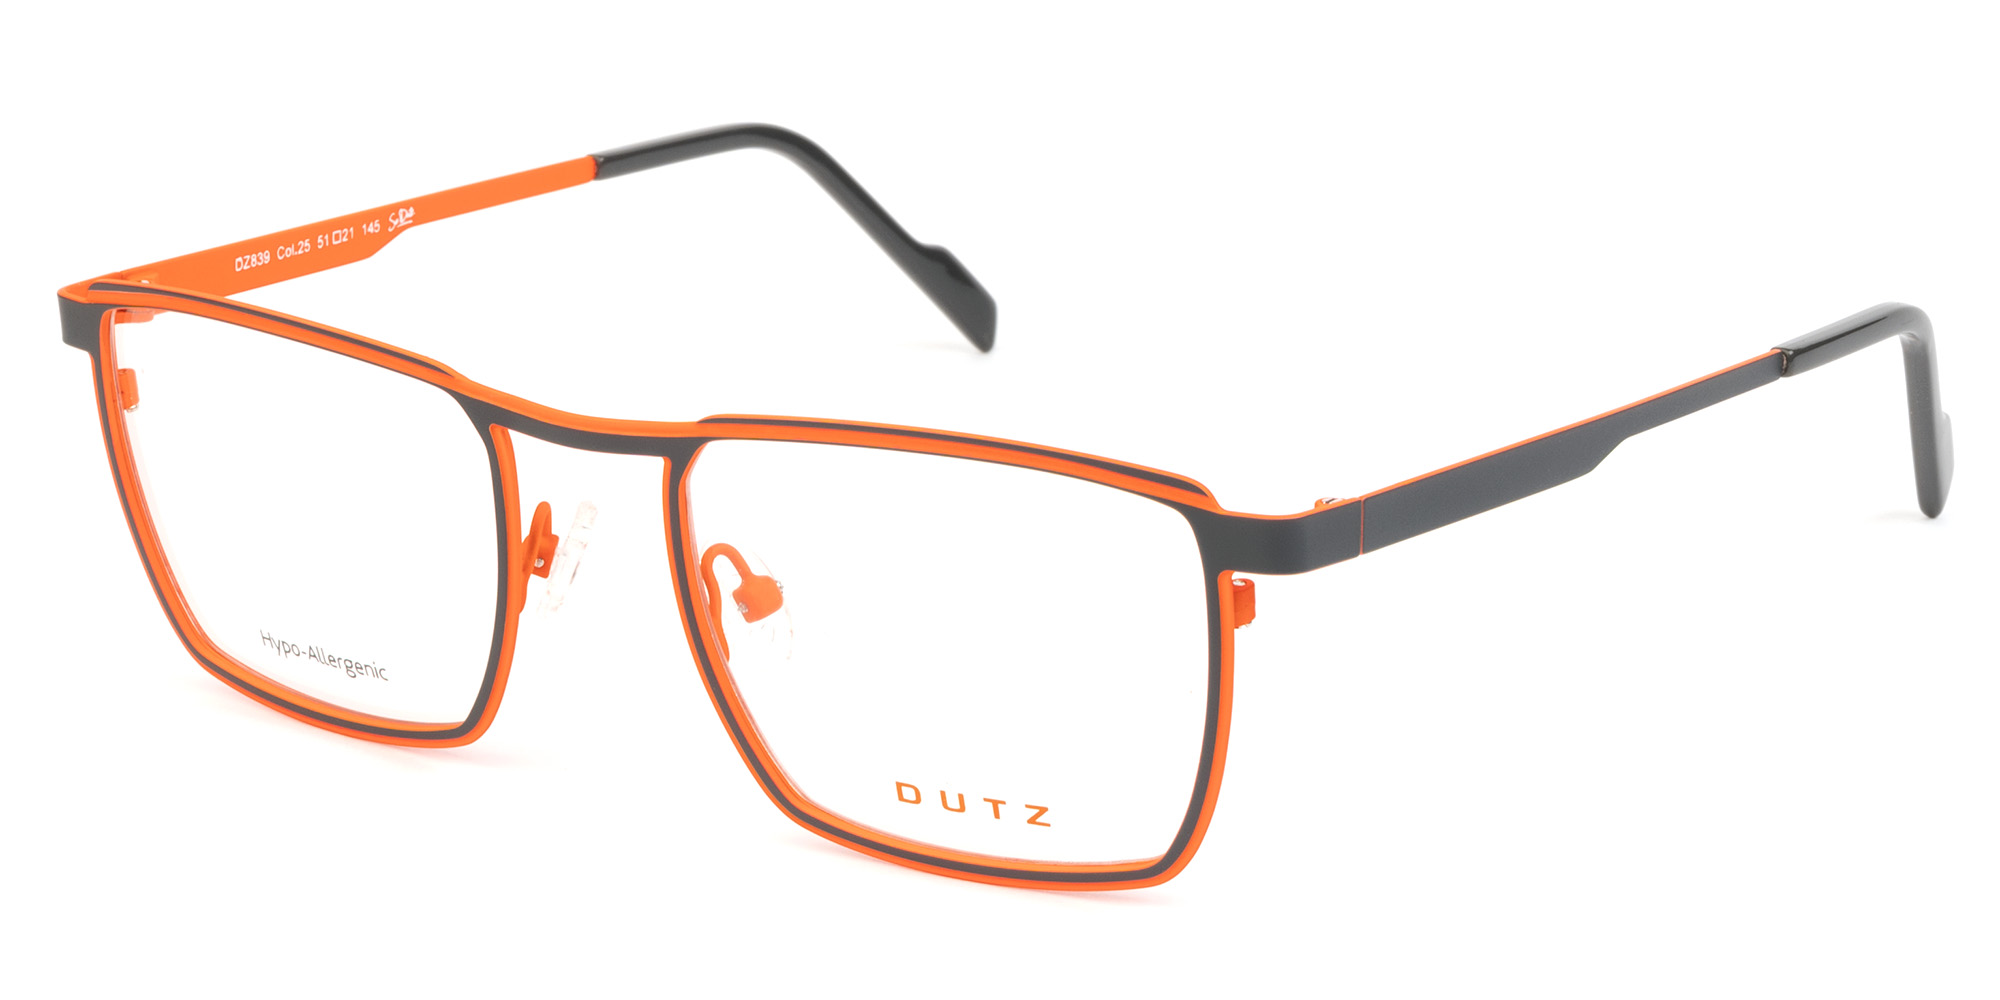 Men's, rectangular, bicolor, dark grey combined with orange, metallic frame and temples, with assorted color acetate temple tips